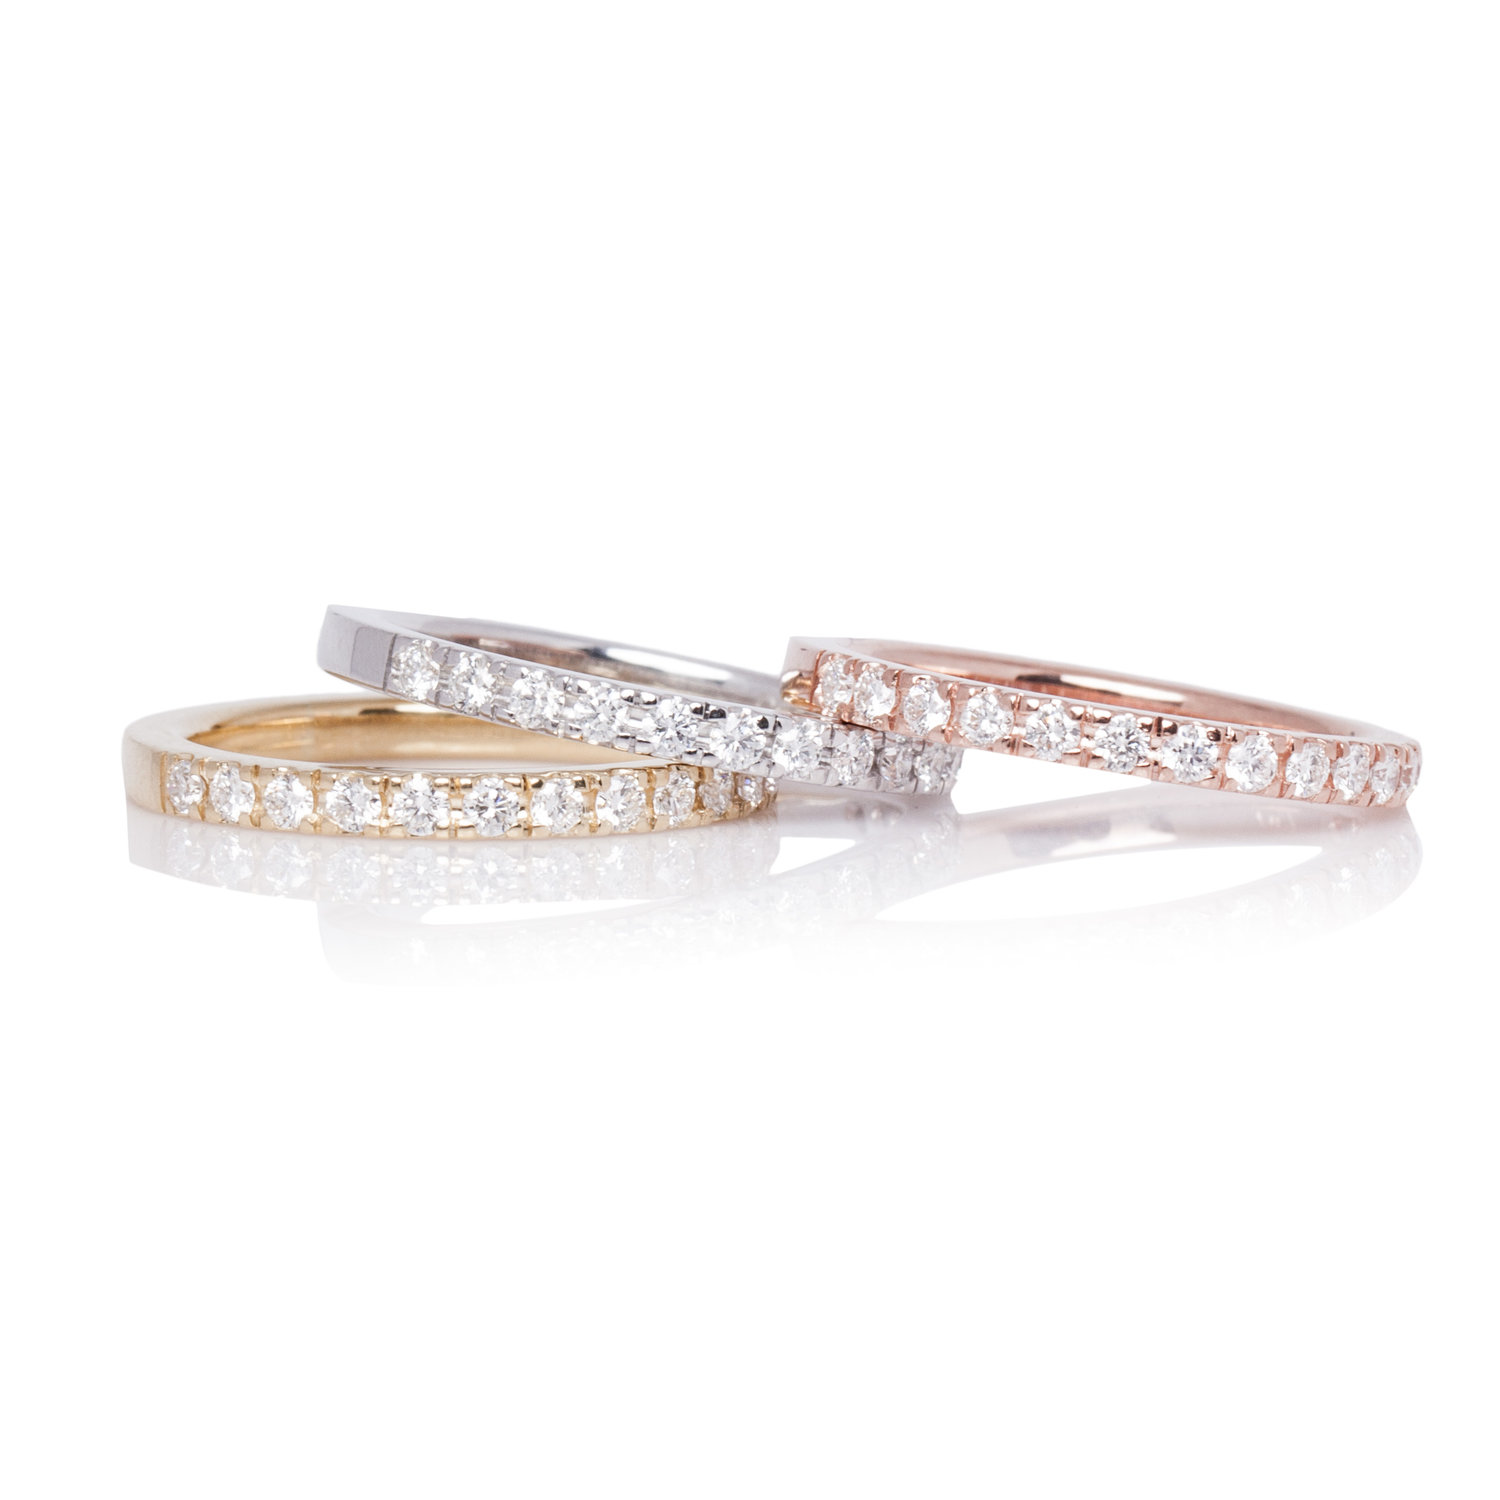 27-continental-jewels-manufacturers-rings-cjr000027-18k-rose-gold-white-gold-yellow-gold-vvs1-diamonds-stacked-rings.jpg